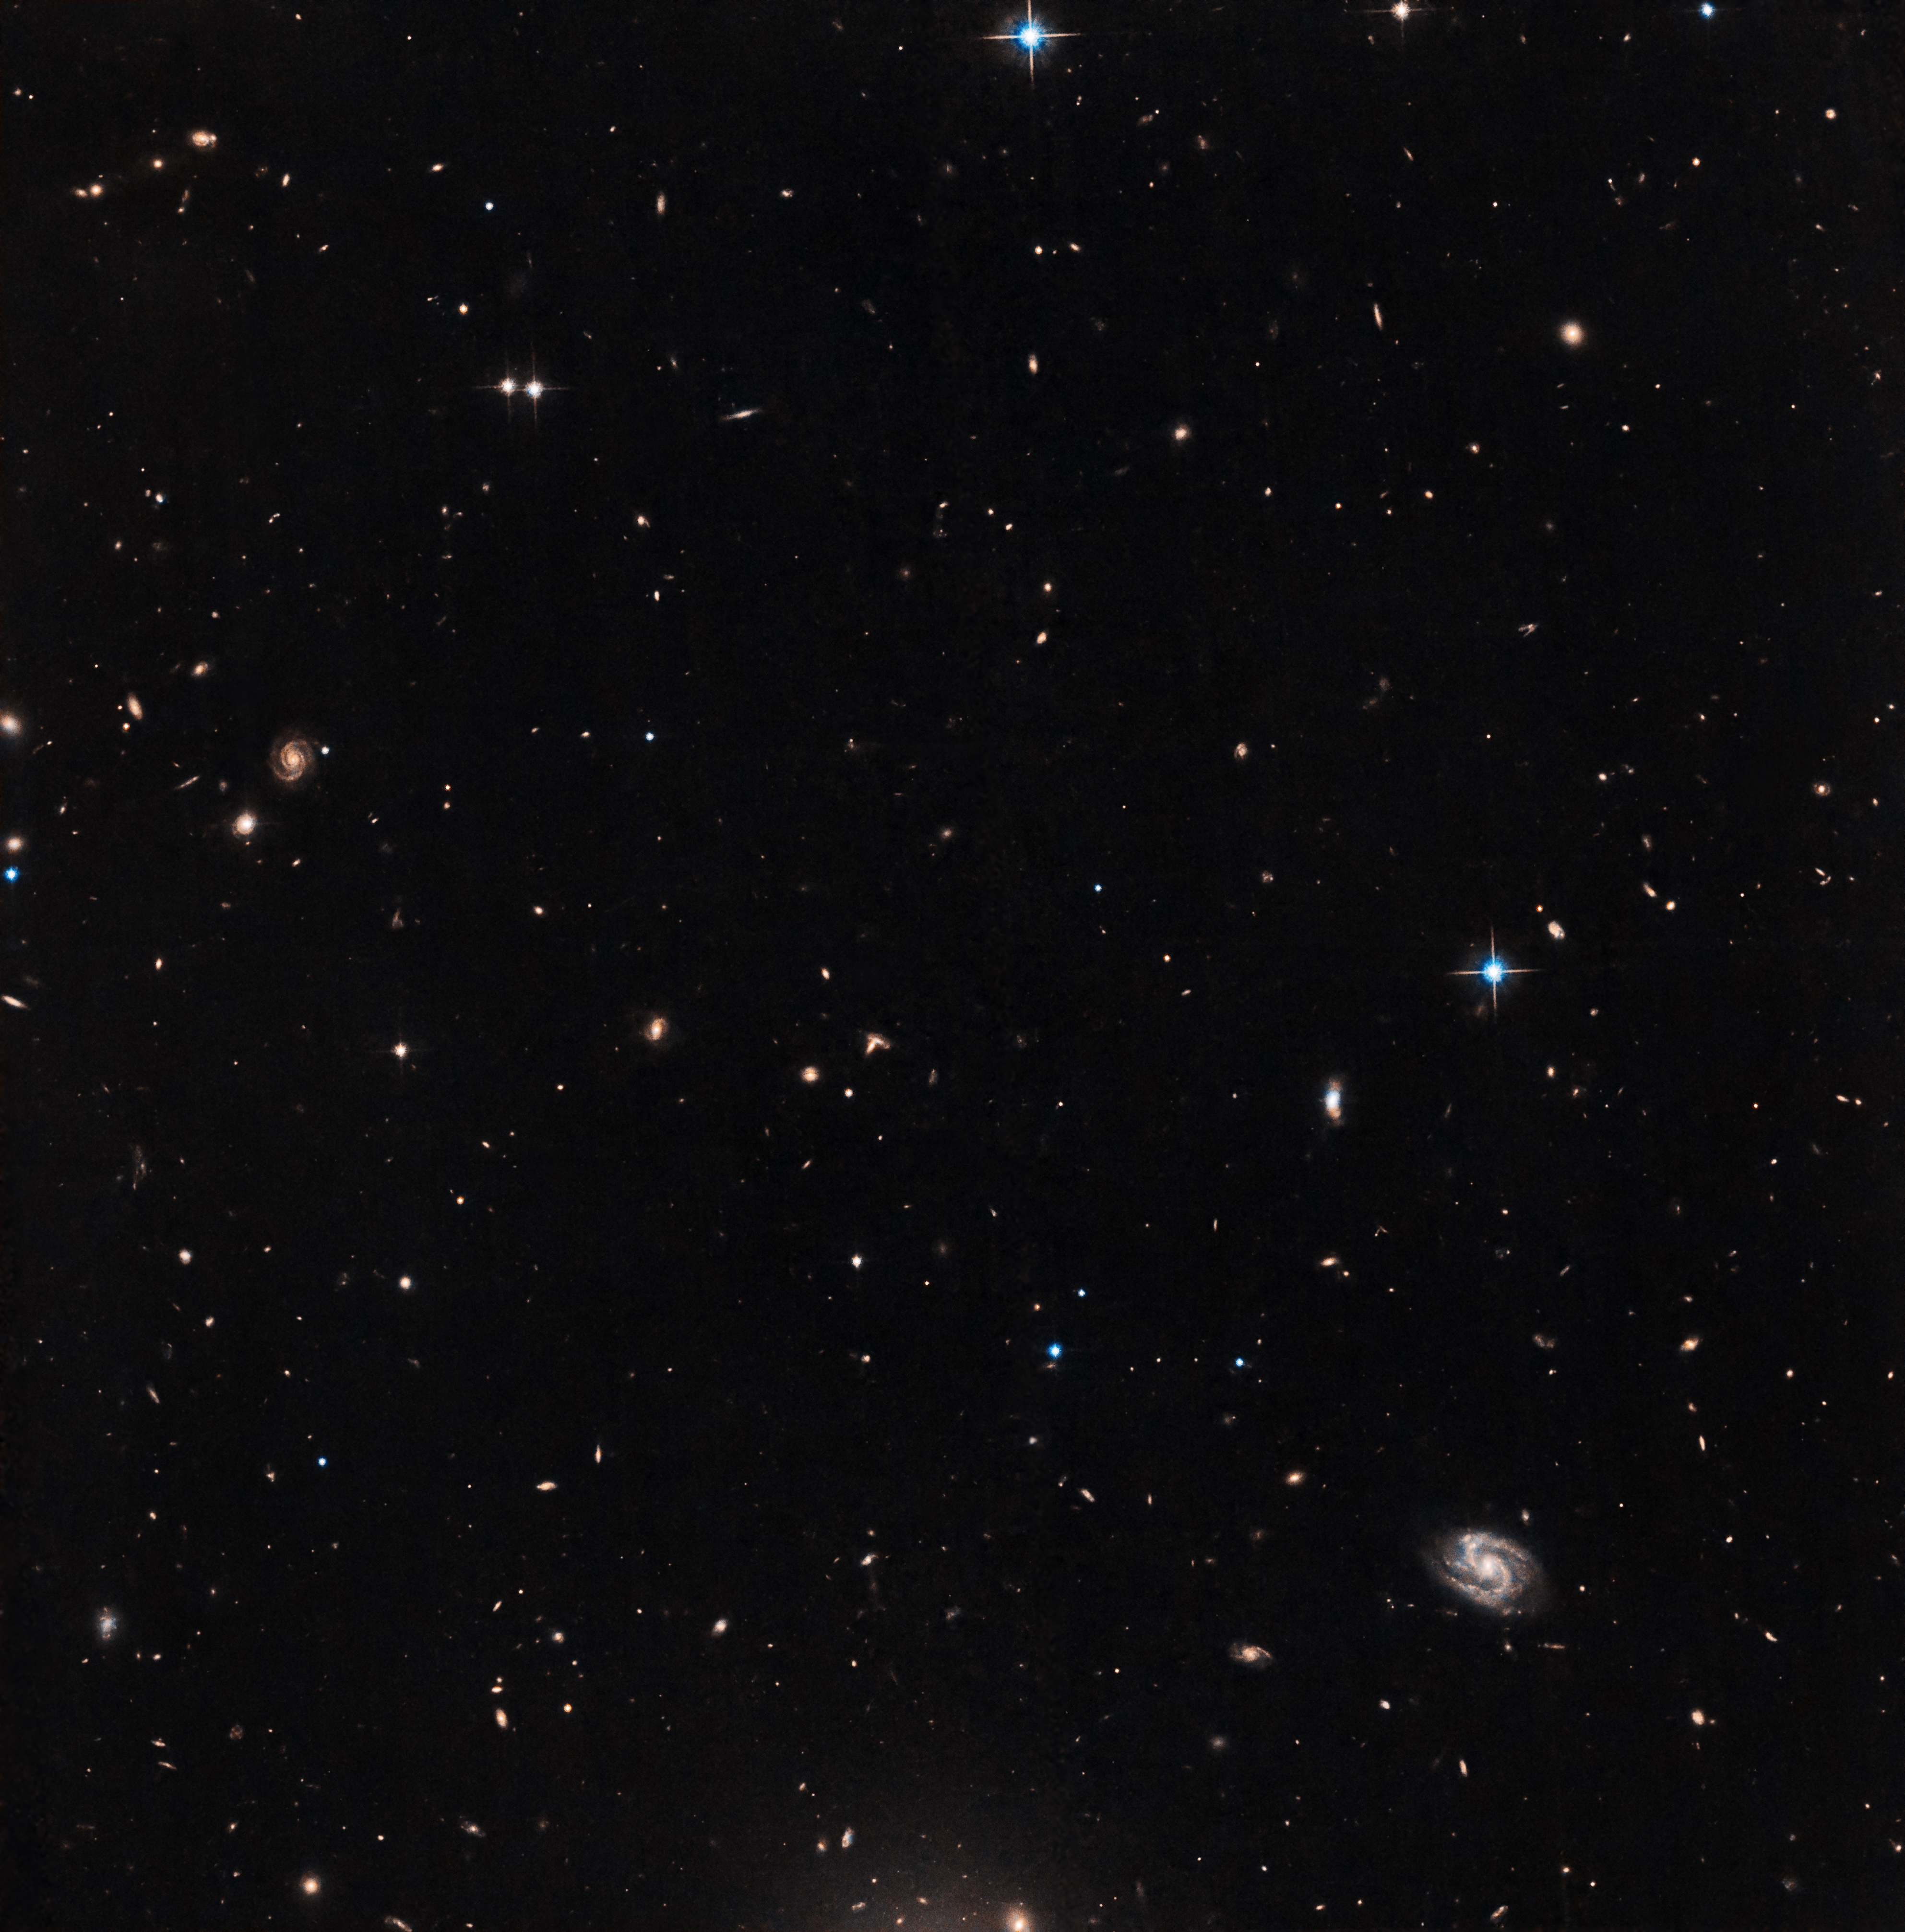 Background galaxies and stars are sprinkled across a black background. Some of the distant galaxies are spirals.